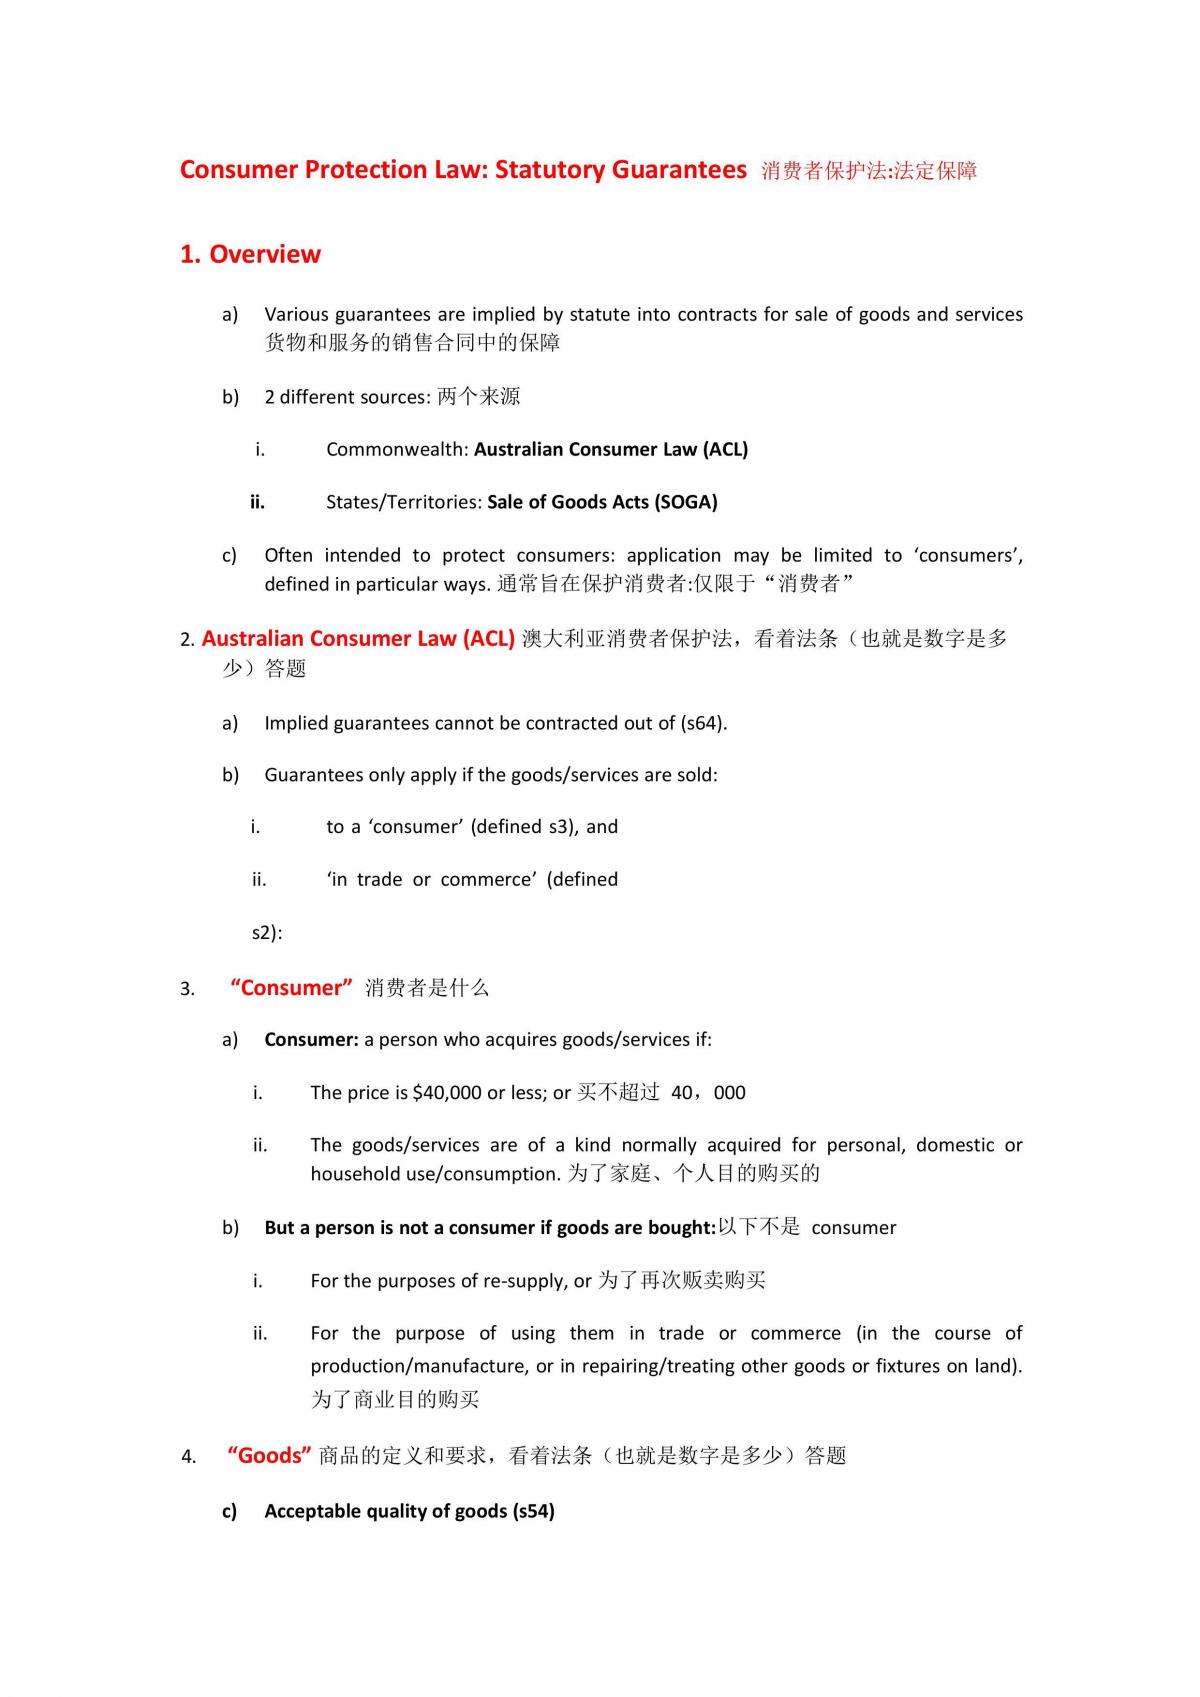 Customer protection law - Page 1